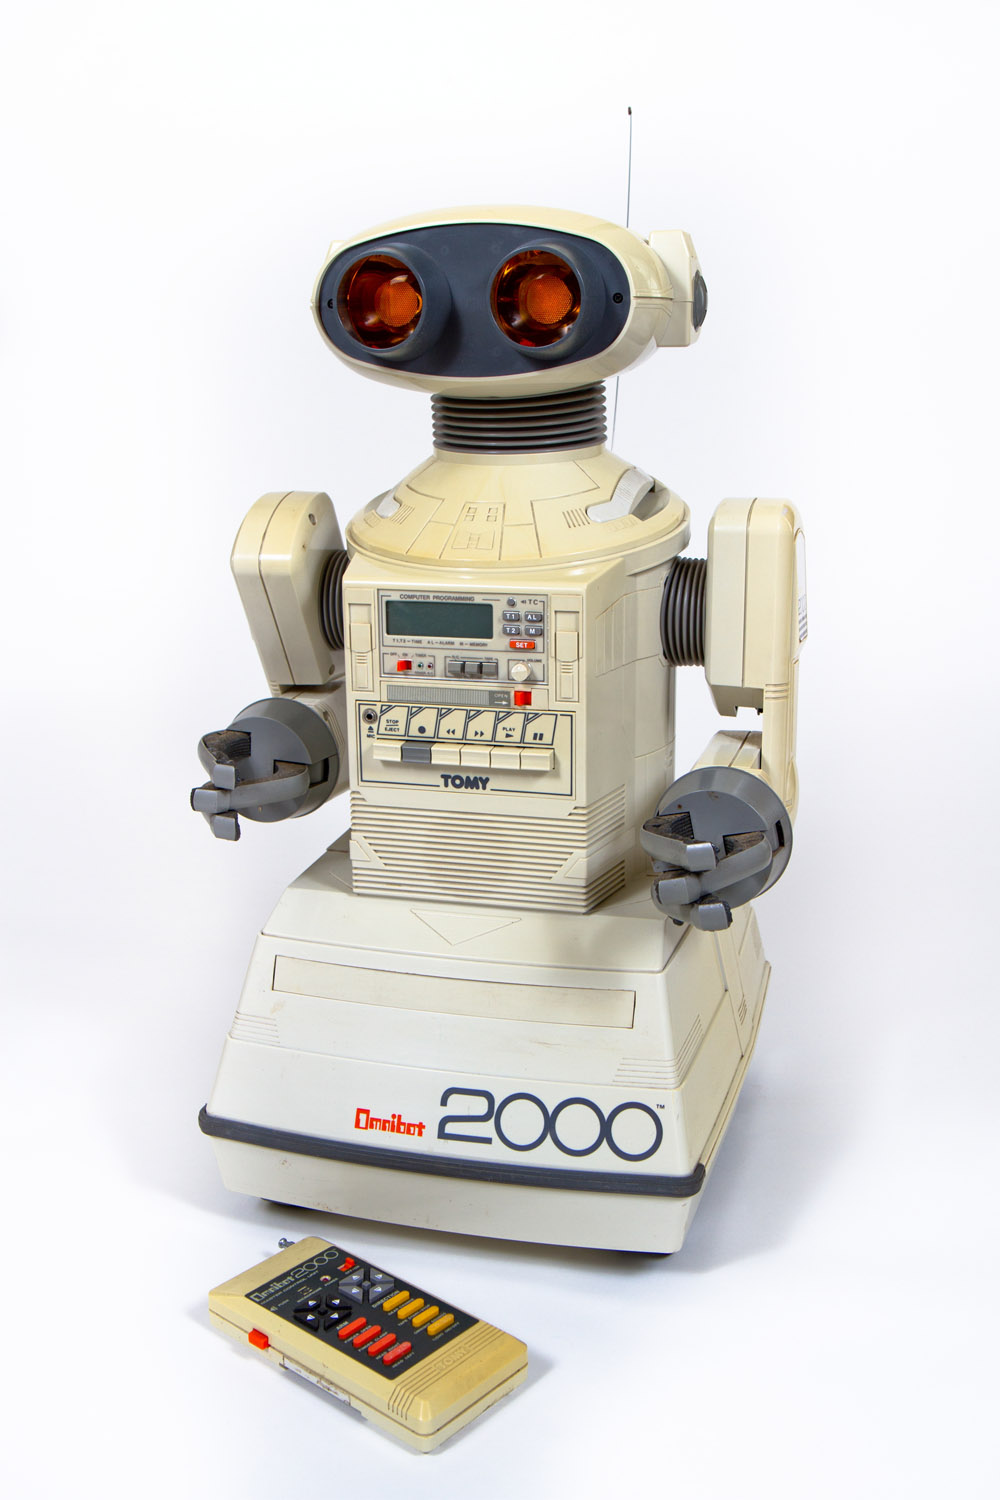 Century of the Child: Growing by Design 1900-2000 Omnibot 2000, remote-controlled robot. c. 1985. Various materials, 24 x 15 x 14″ (61 x 38.1 x 35.6 cm). Manufactured by Tomy (formerly Tomiyama), Katsushika, Tokyo. Space Age Museum/Kleeman Family Collection, Litchfield, Connecticut